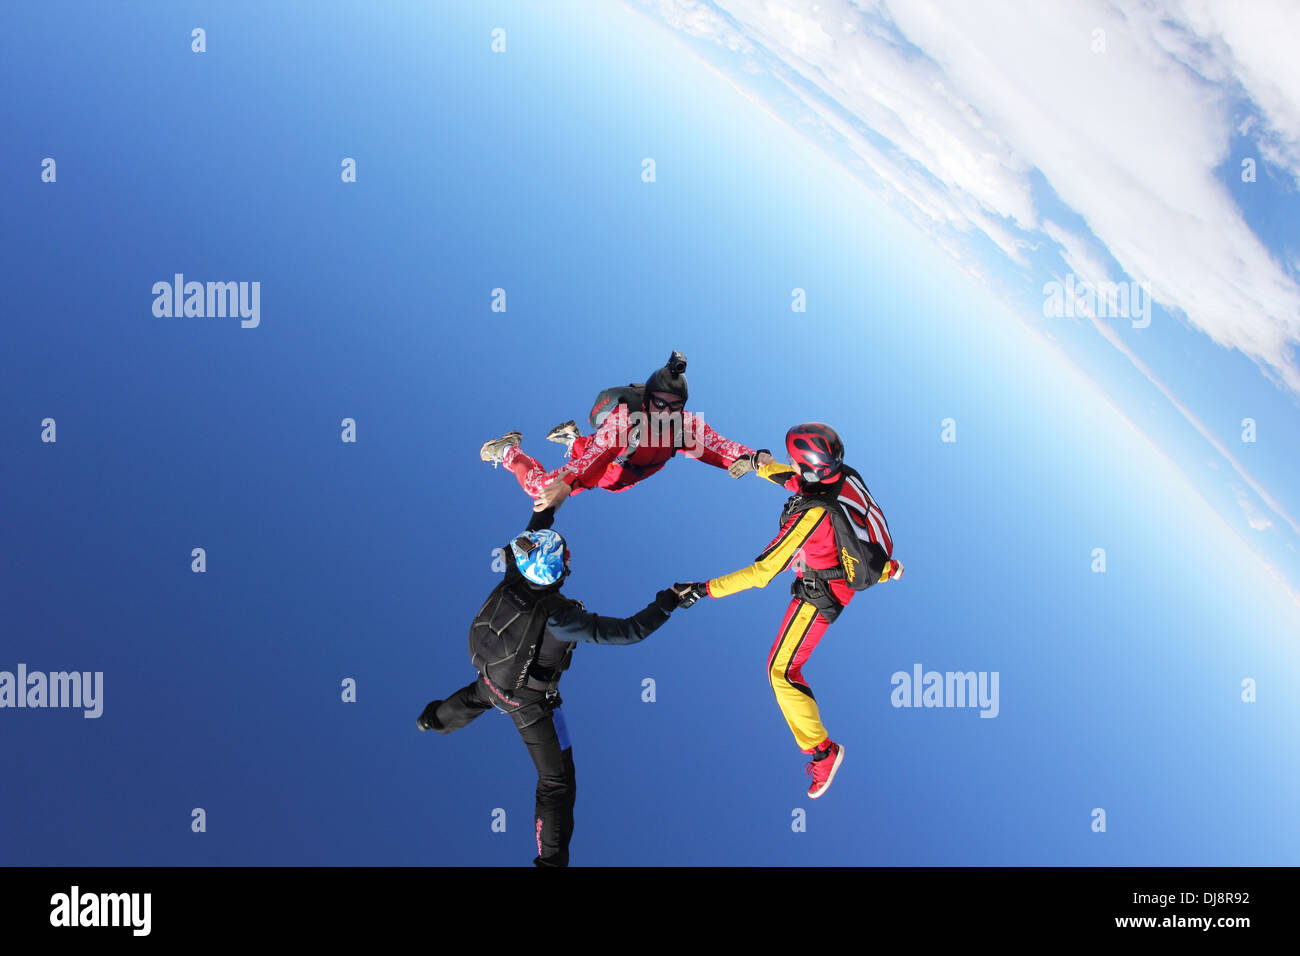 Skydivers are jumping out of an airplane and holding hand for a big formation together in the sky. Stock Photo